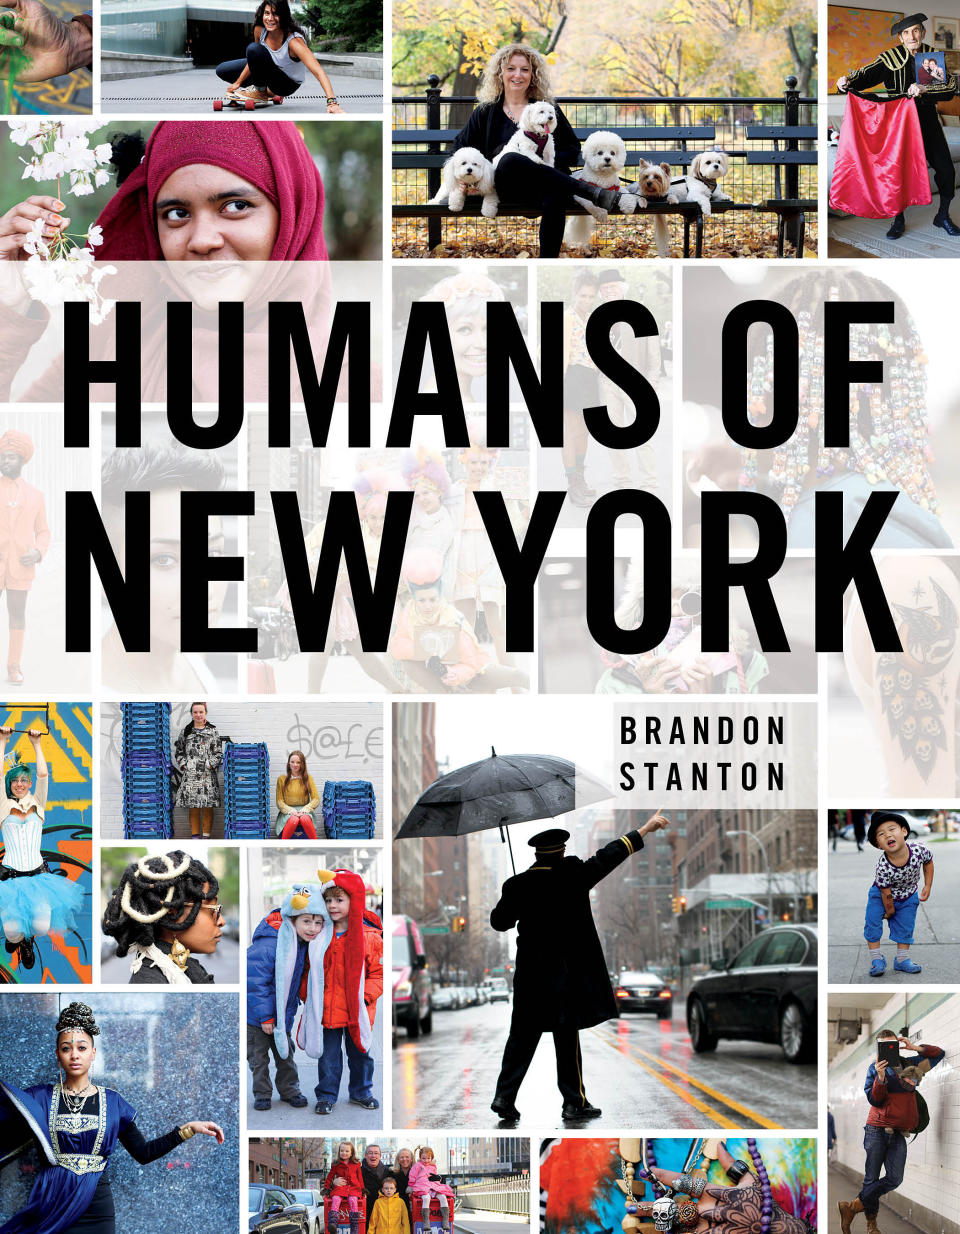 This book cover image released by St. Martin's Press shows "Humans of New York," by Brandon Stanton. The holidays bring out the inner-coffee table book obsessive in gift buyers. They're easy, weighty and satisfying to give. (AP Photo/St. Martin's Press)